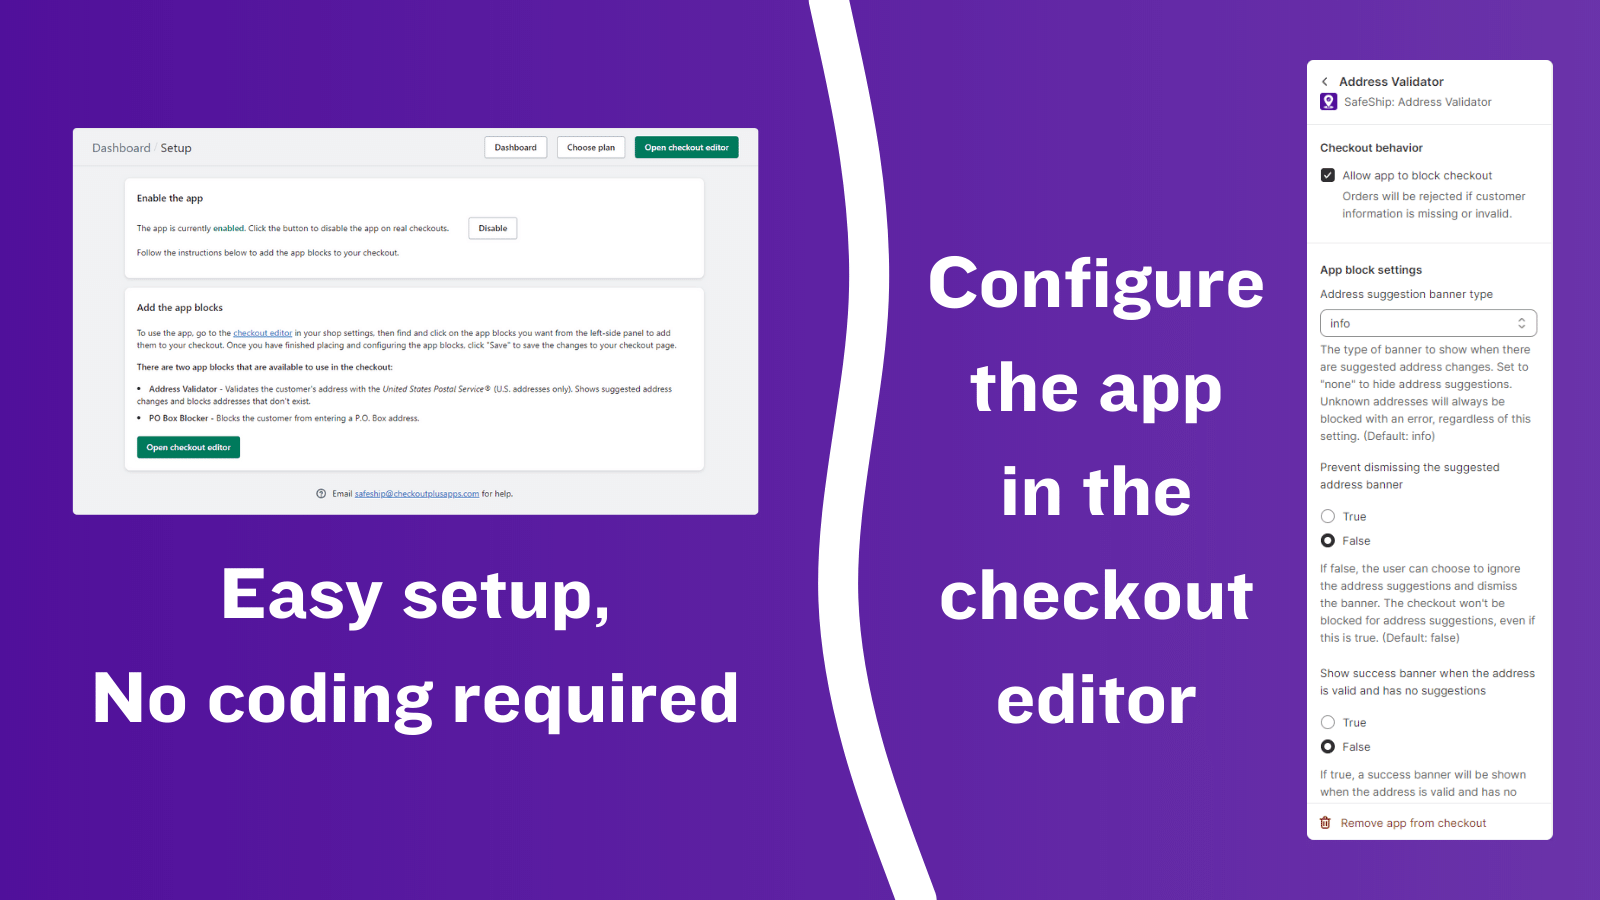 Easy setup, No coding required; Configure in the checkout editor